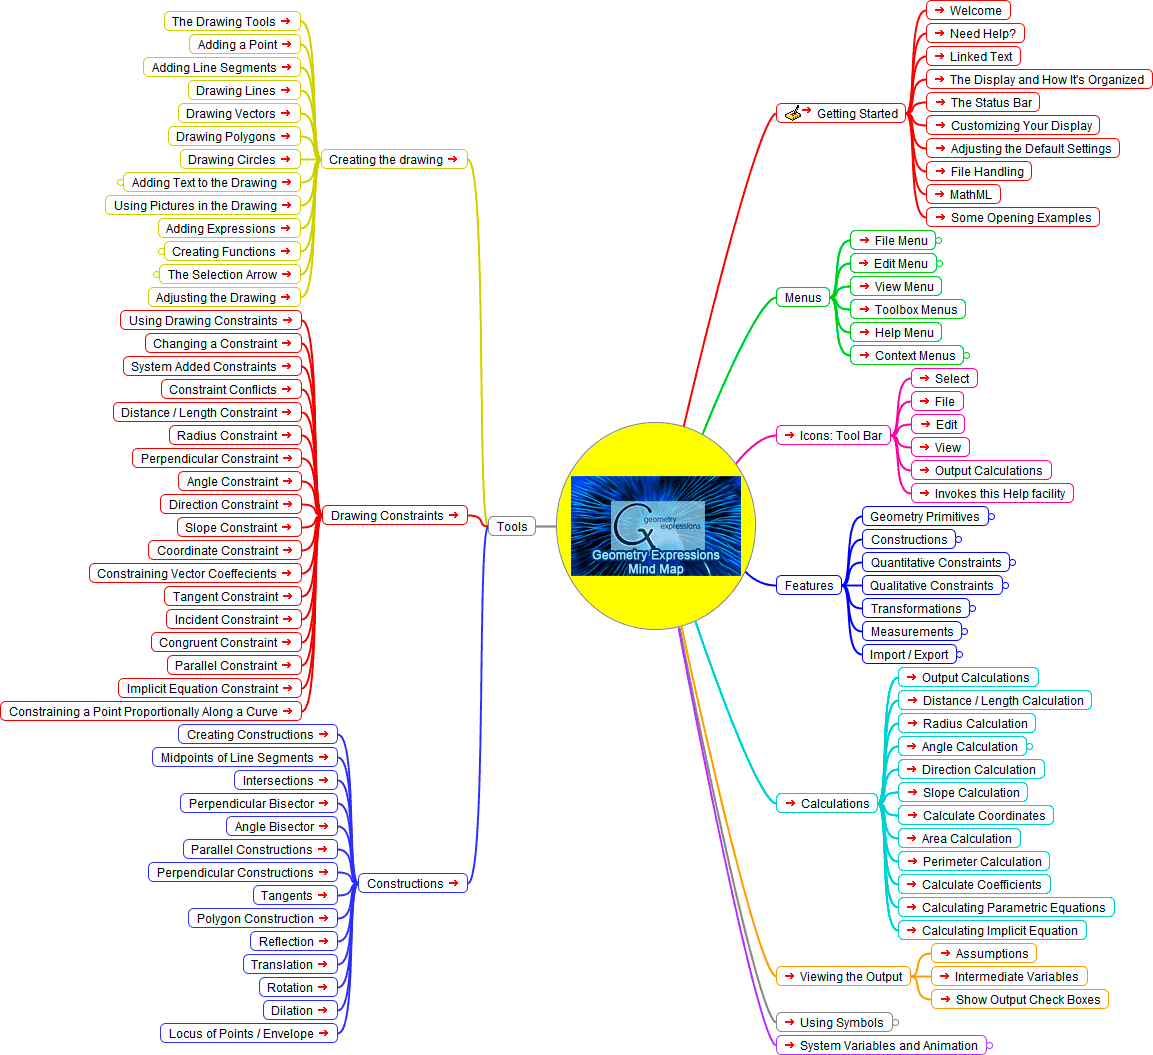 Geometry Expressions Mind Map